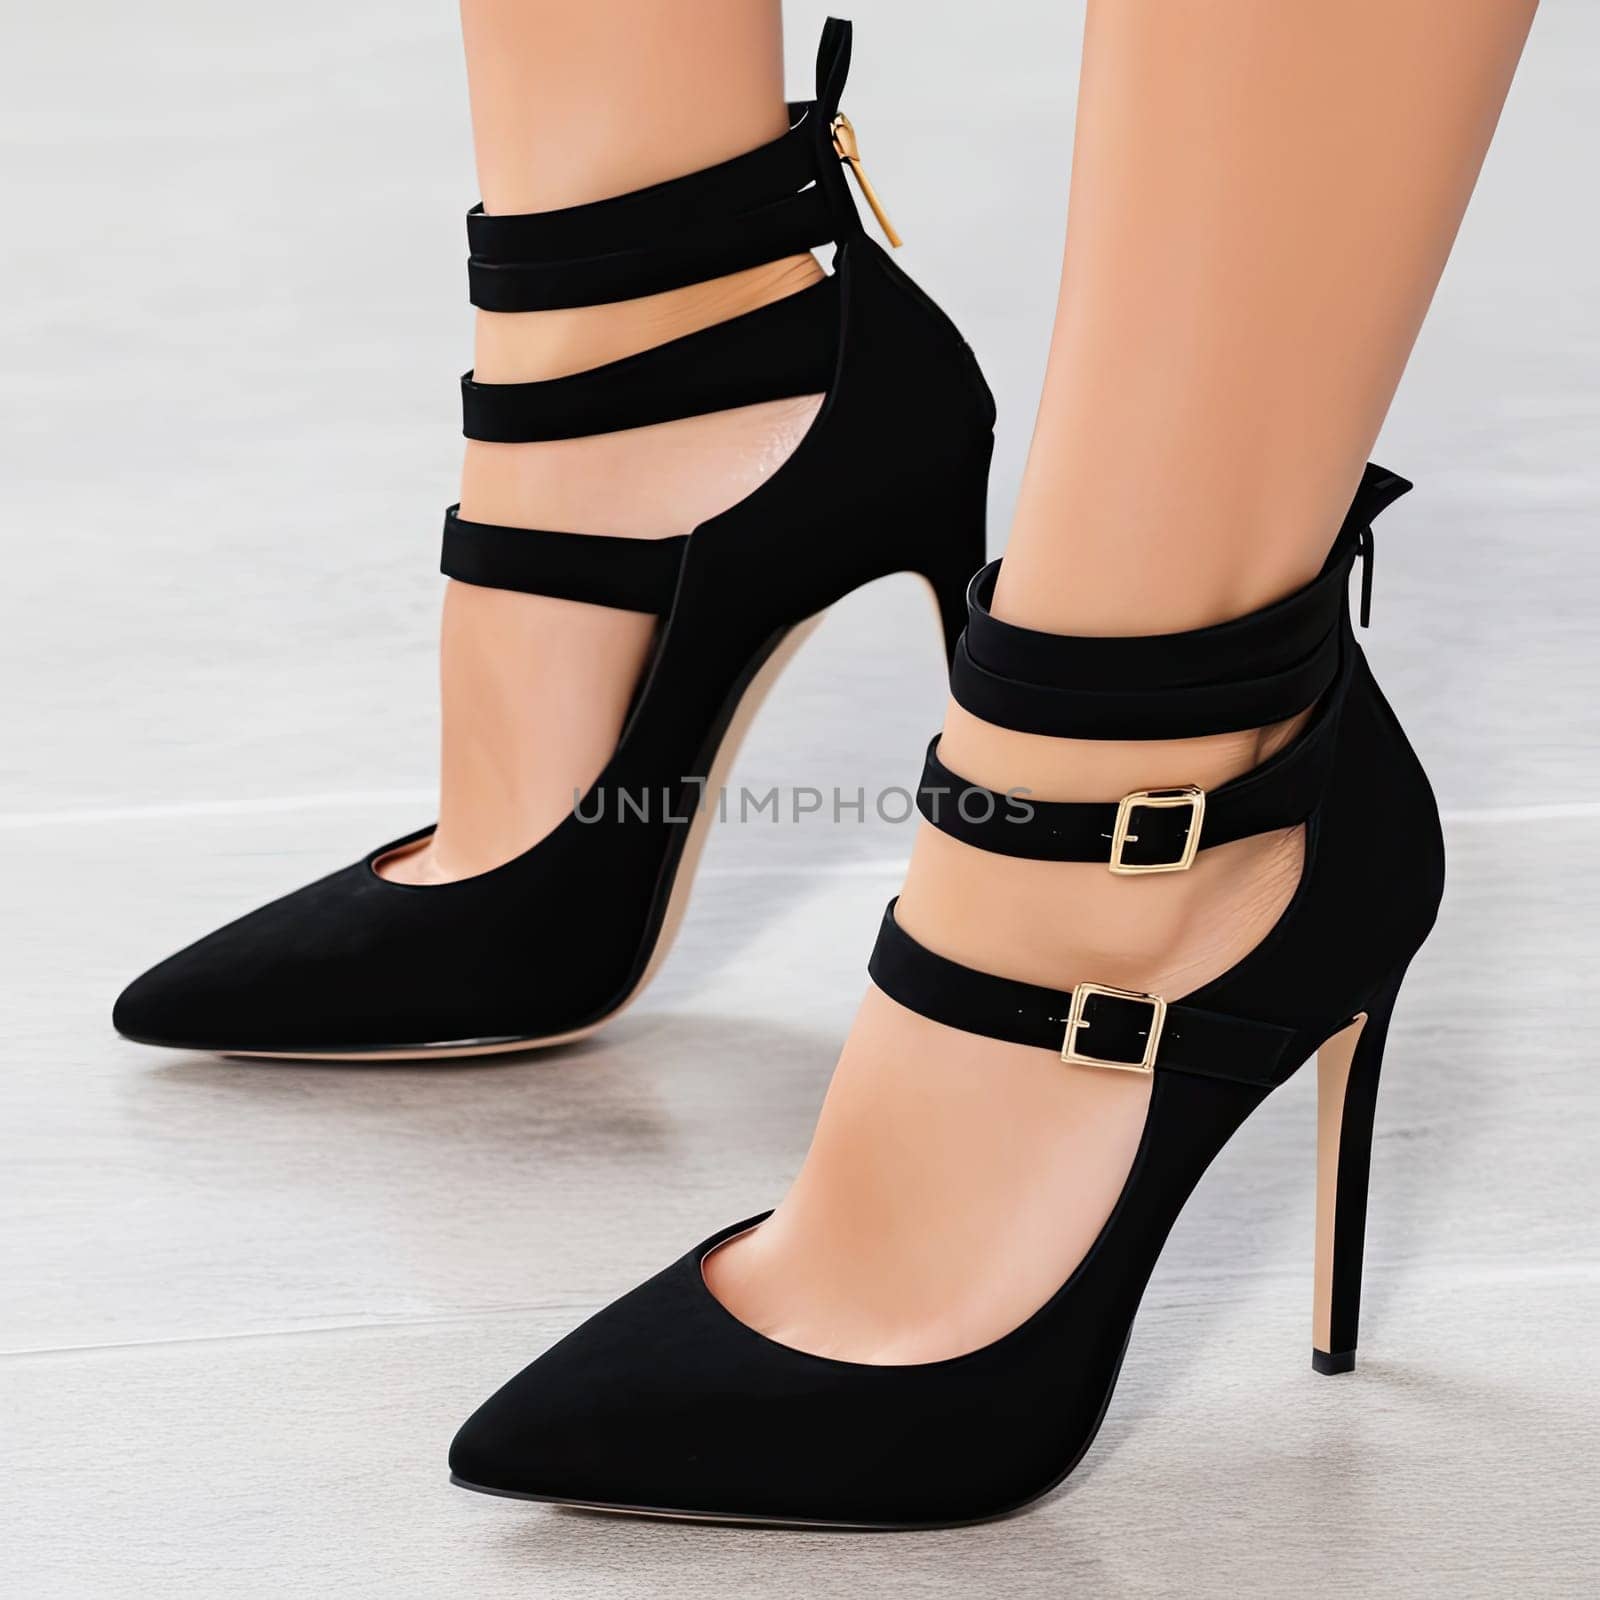 Fashionable woman in a black high heels sandals. Lady shoes